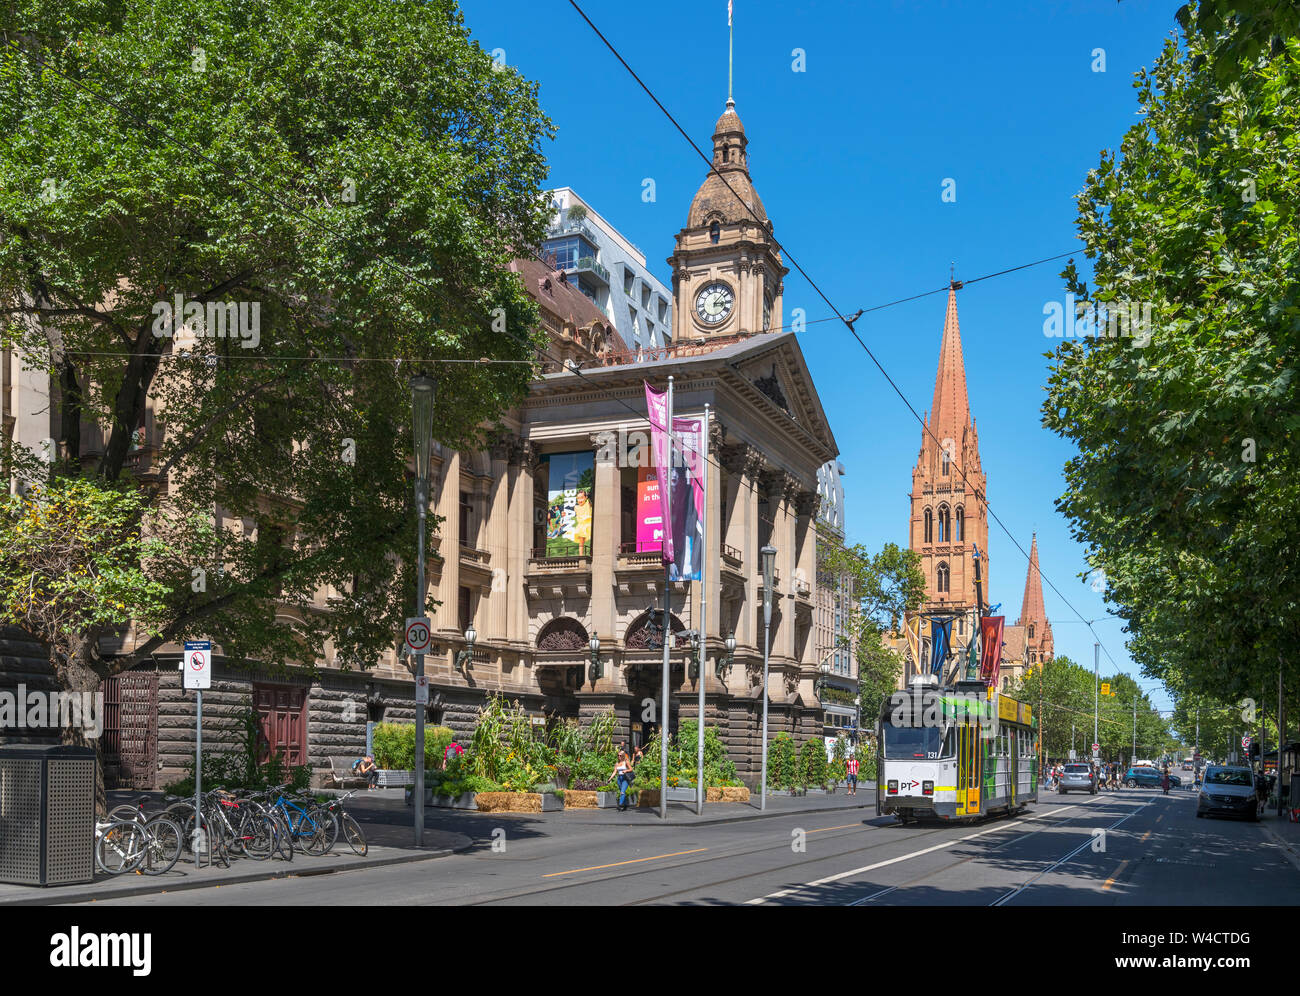 Tram in front of Melbourne Town Hall on Swanston Street looking towards St Paul's Cathedral, Melbourne, Victoria, Australia Stock Photo